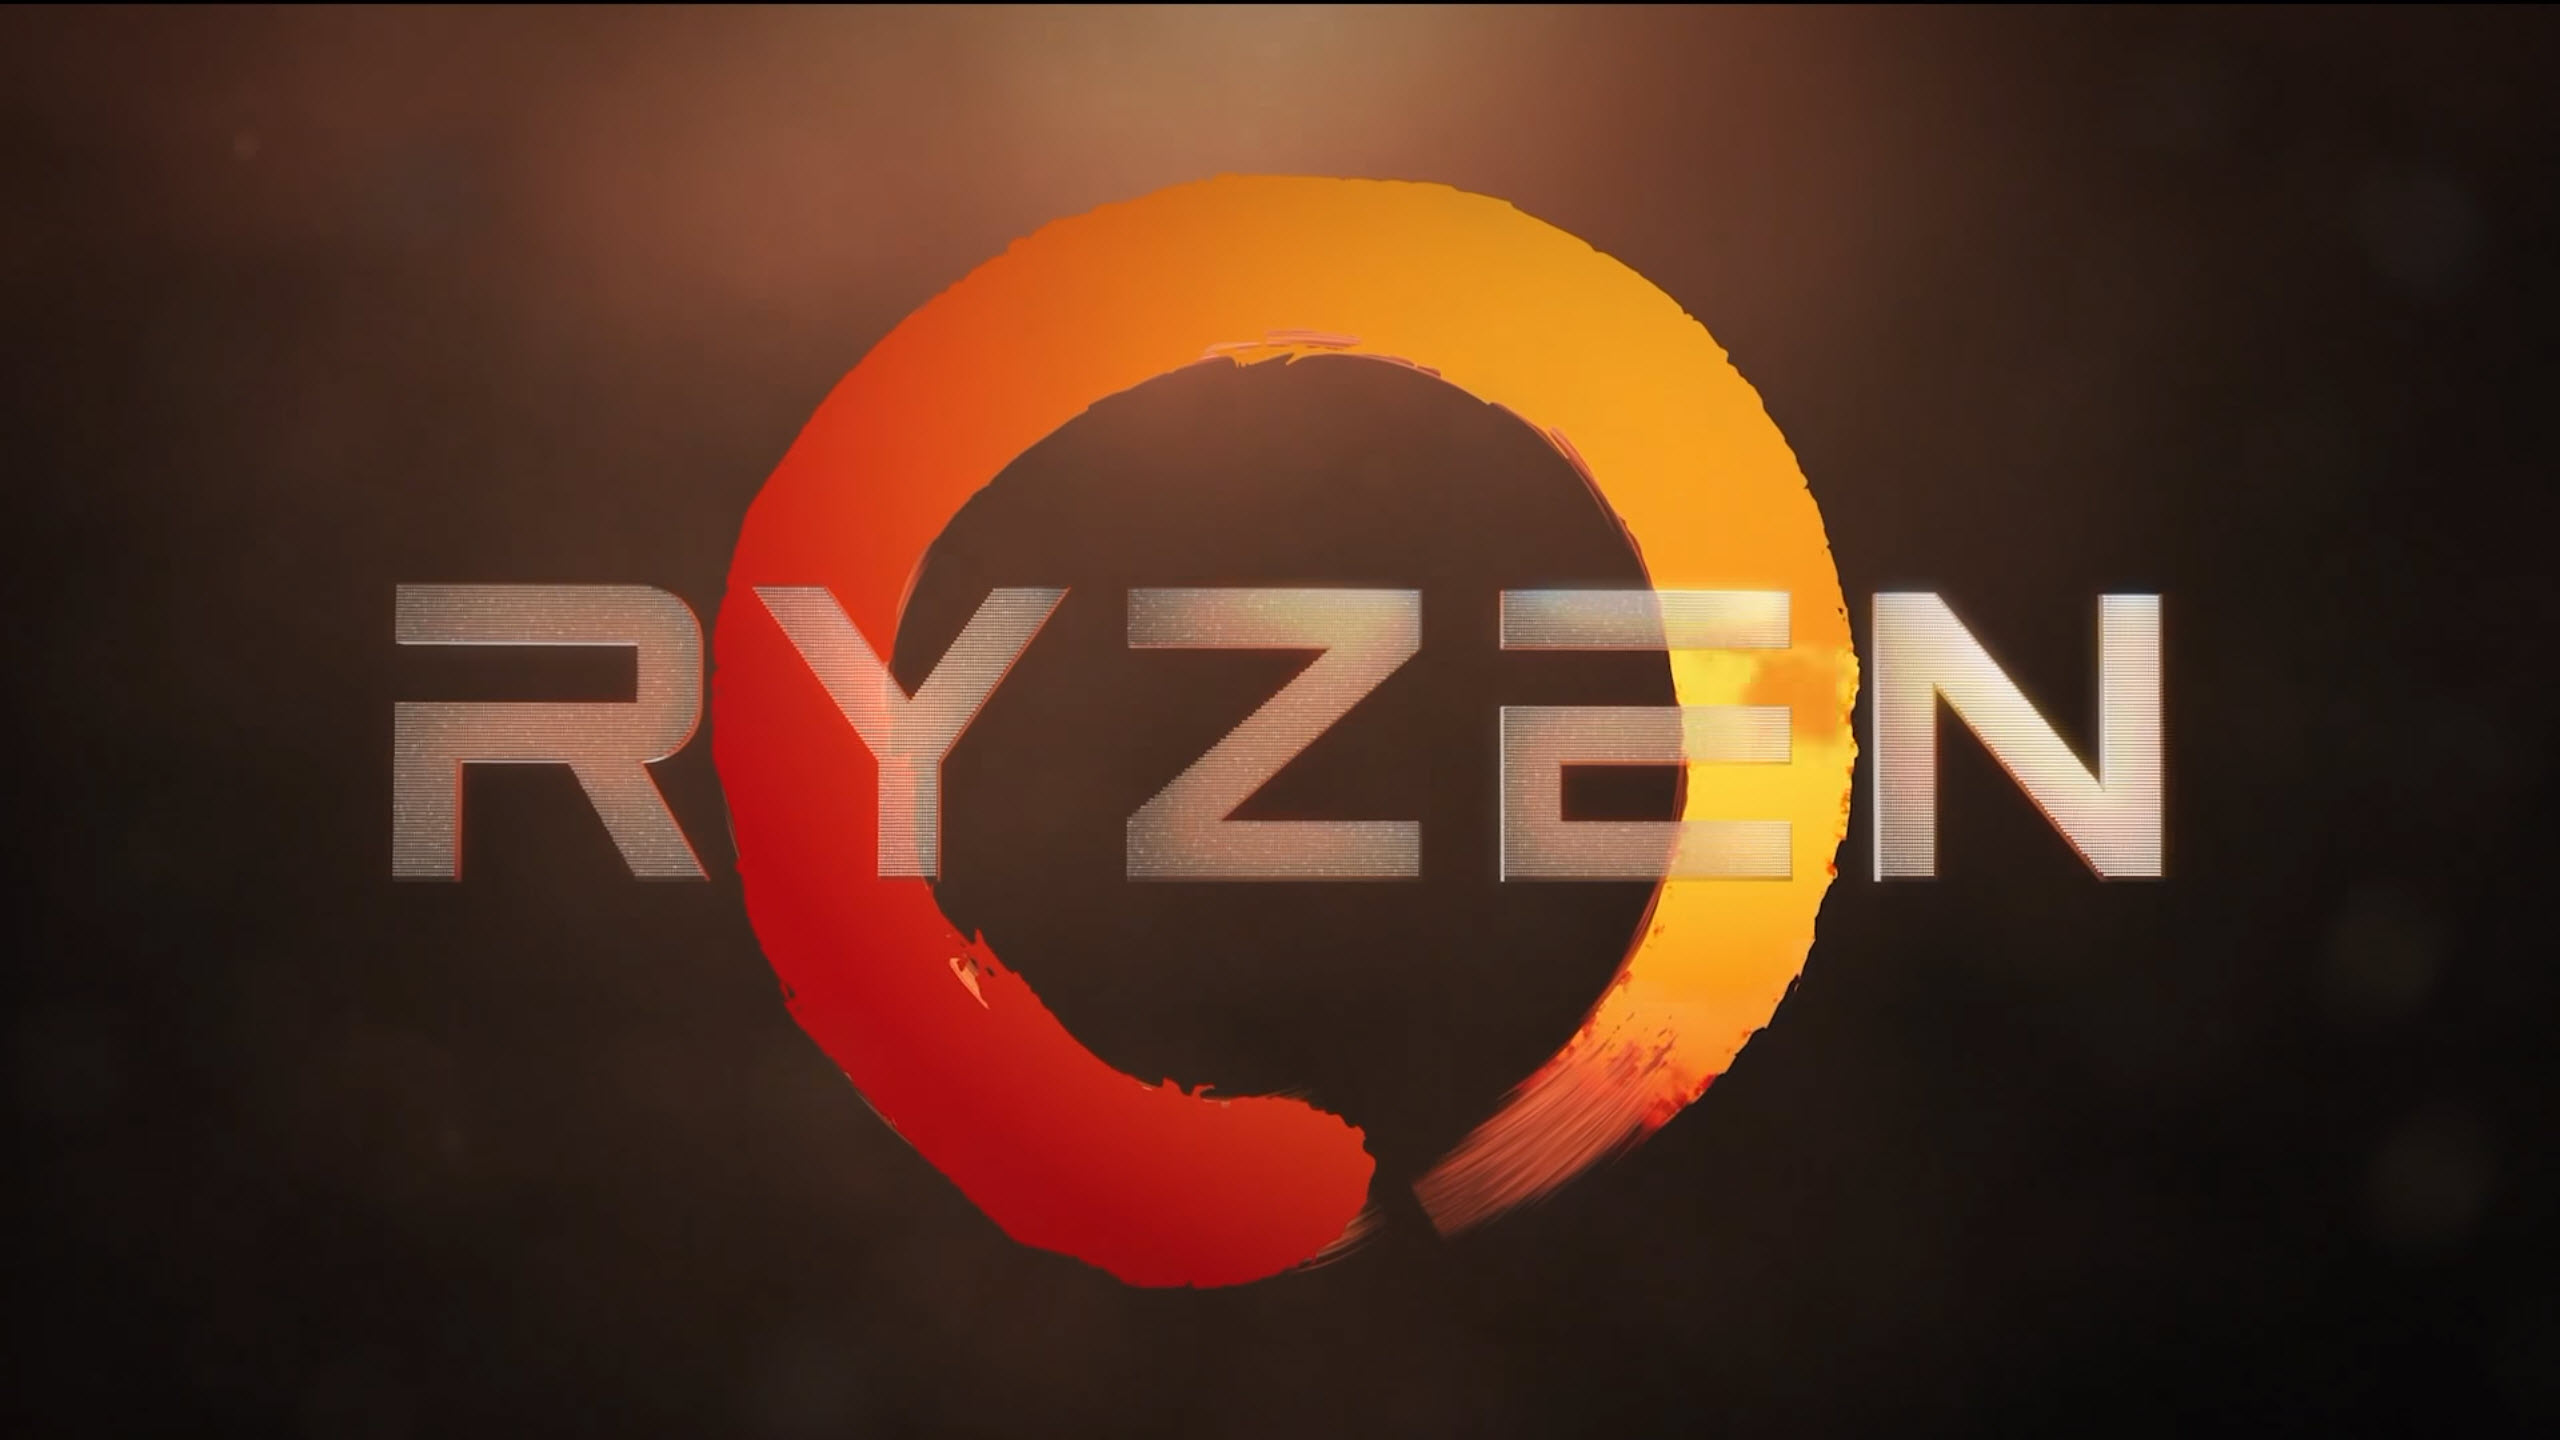 AMD Integrates Ryzen Power Patch in Latest v17.10 Chipset Drivers